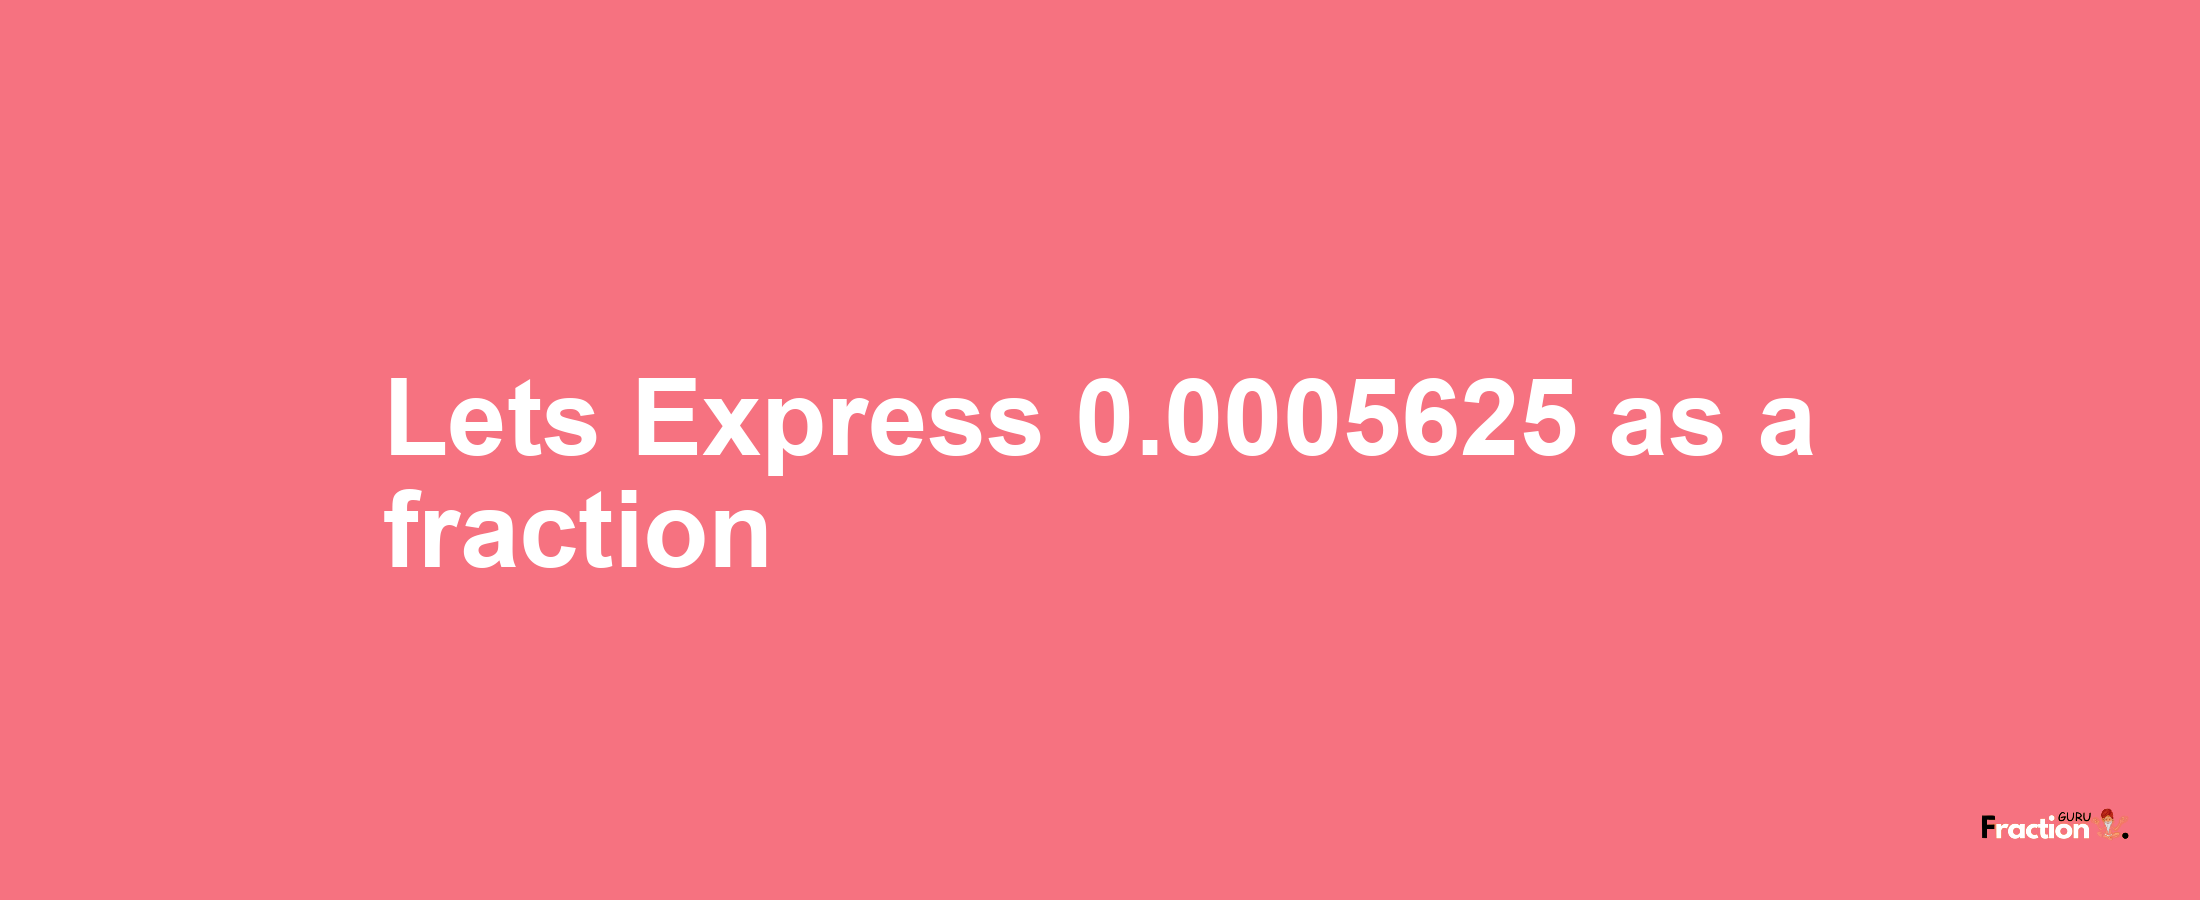 Lets Express 0.0005625 as afraction